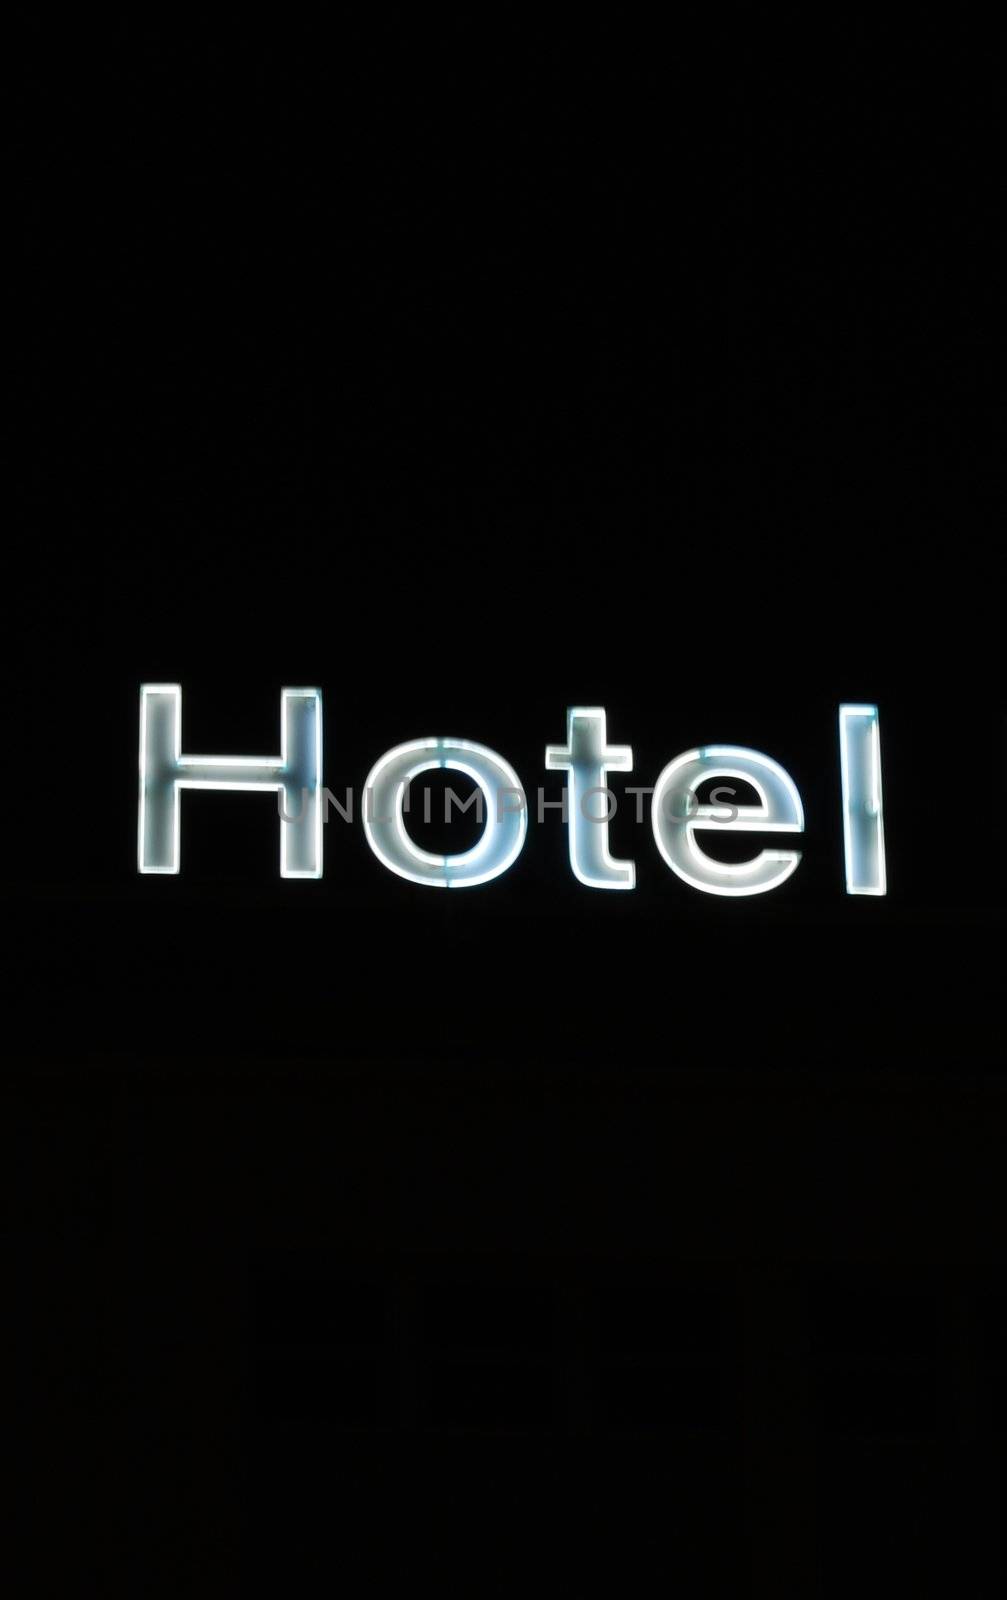 photo of a Hotel sign on black background